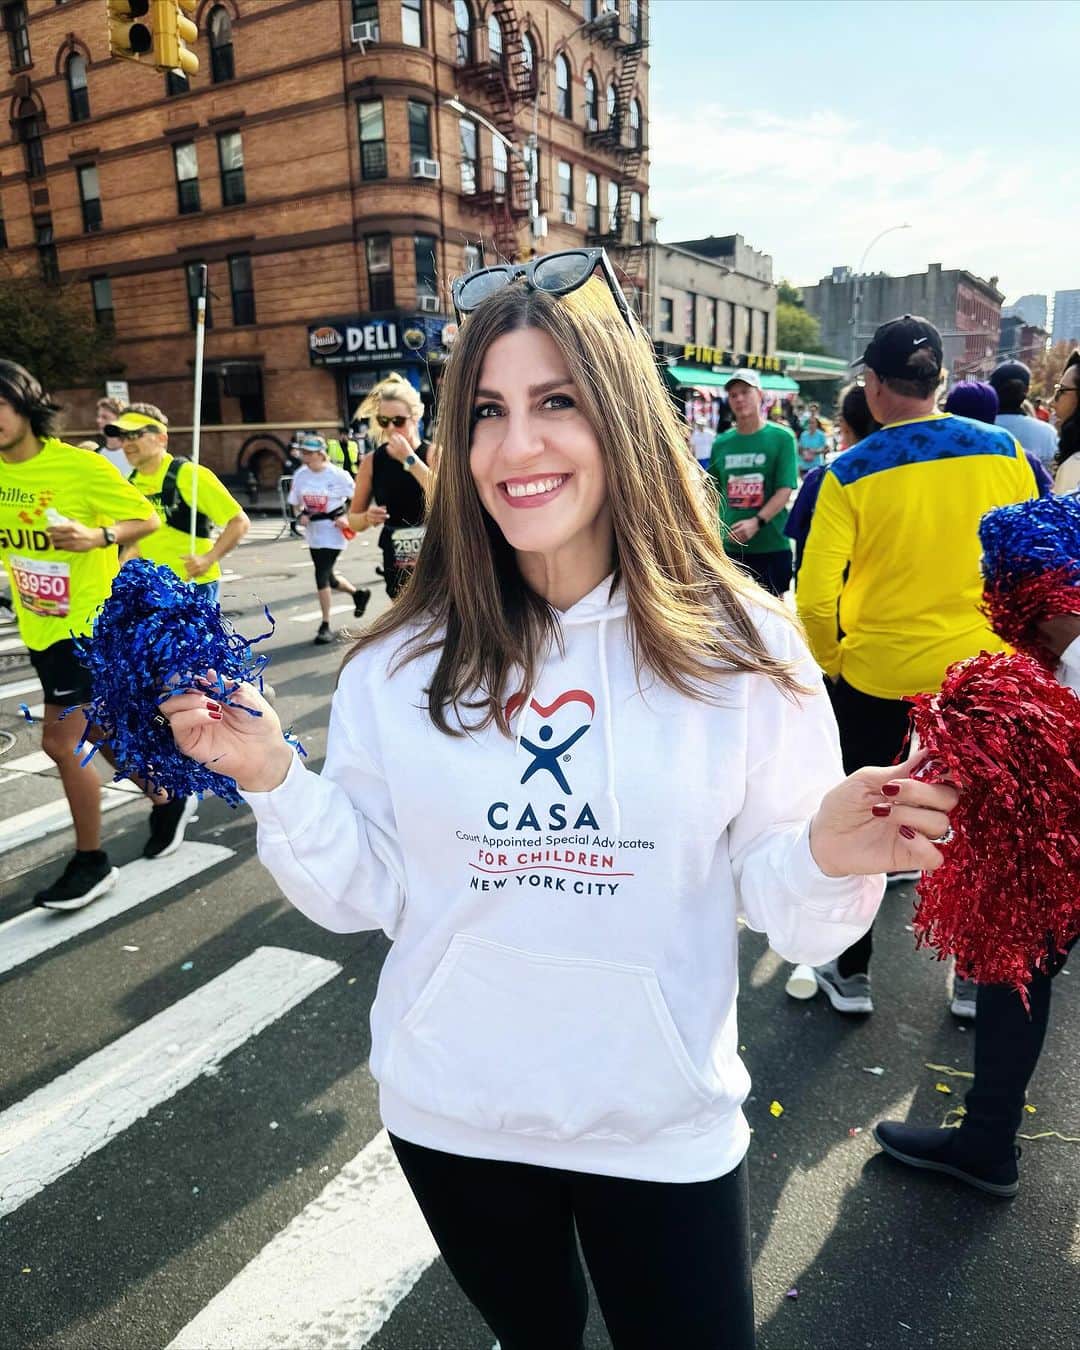 Ilana Wilesのインスタグラム：「There are the runners at the NYC marathon and then there are the spectators. I didn’t run, but I had the best time cheering for everyone I knew who did! Real life friends, online friends and most importantly, the members of our @nyccasa team who raised over $20k to help youth in foster care. They were so successful that CASA NYC is going to get more slots next year, so if you have dreams of running, hopefully I’ll have more spots to give away to Mommy Shorts followers in 2024! Speaking of followers, I asked yesterday for anyone running to DM me their race numbers and then I put them into my tracking app. Today, my friends and I had so much fun looking for your numbers (since we had no idea what anyone looked like) and screaming your names if we spotted you. Best marathon game ever! Congrats to everyone who ran and finished!」